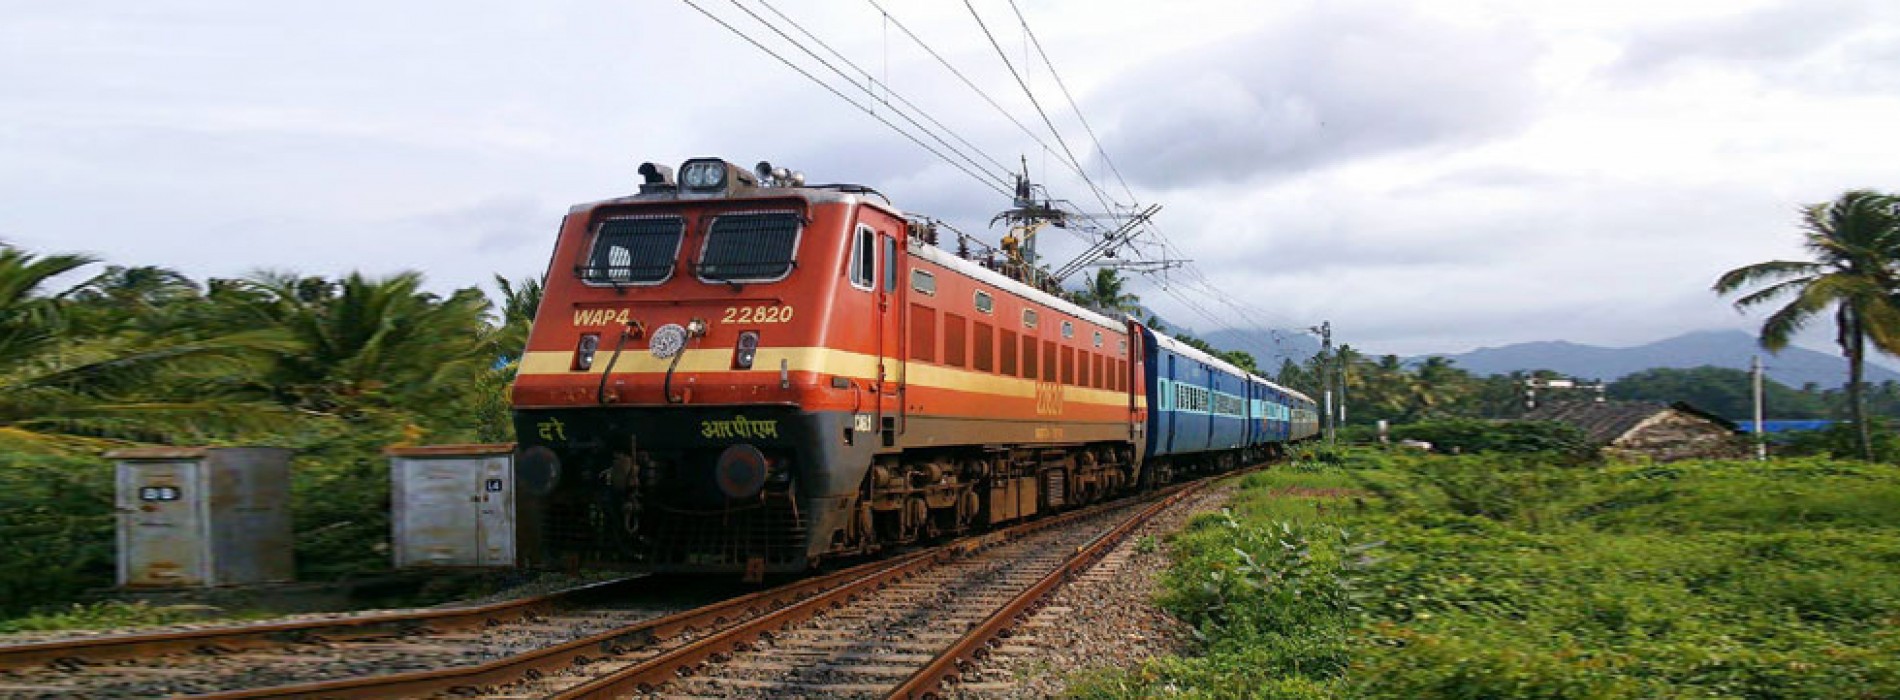 India’s 1st indigenous train with speed of 160 km/hr set to run by December 2018